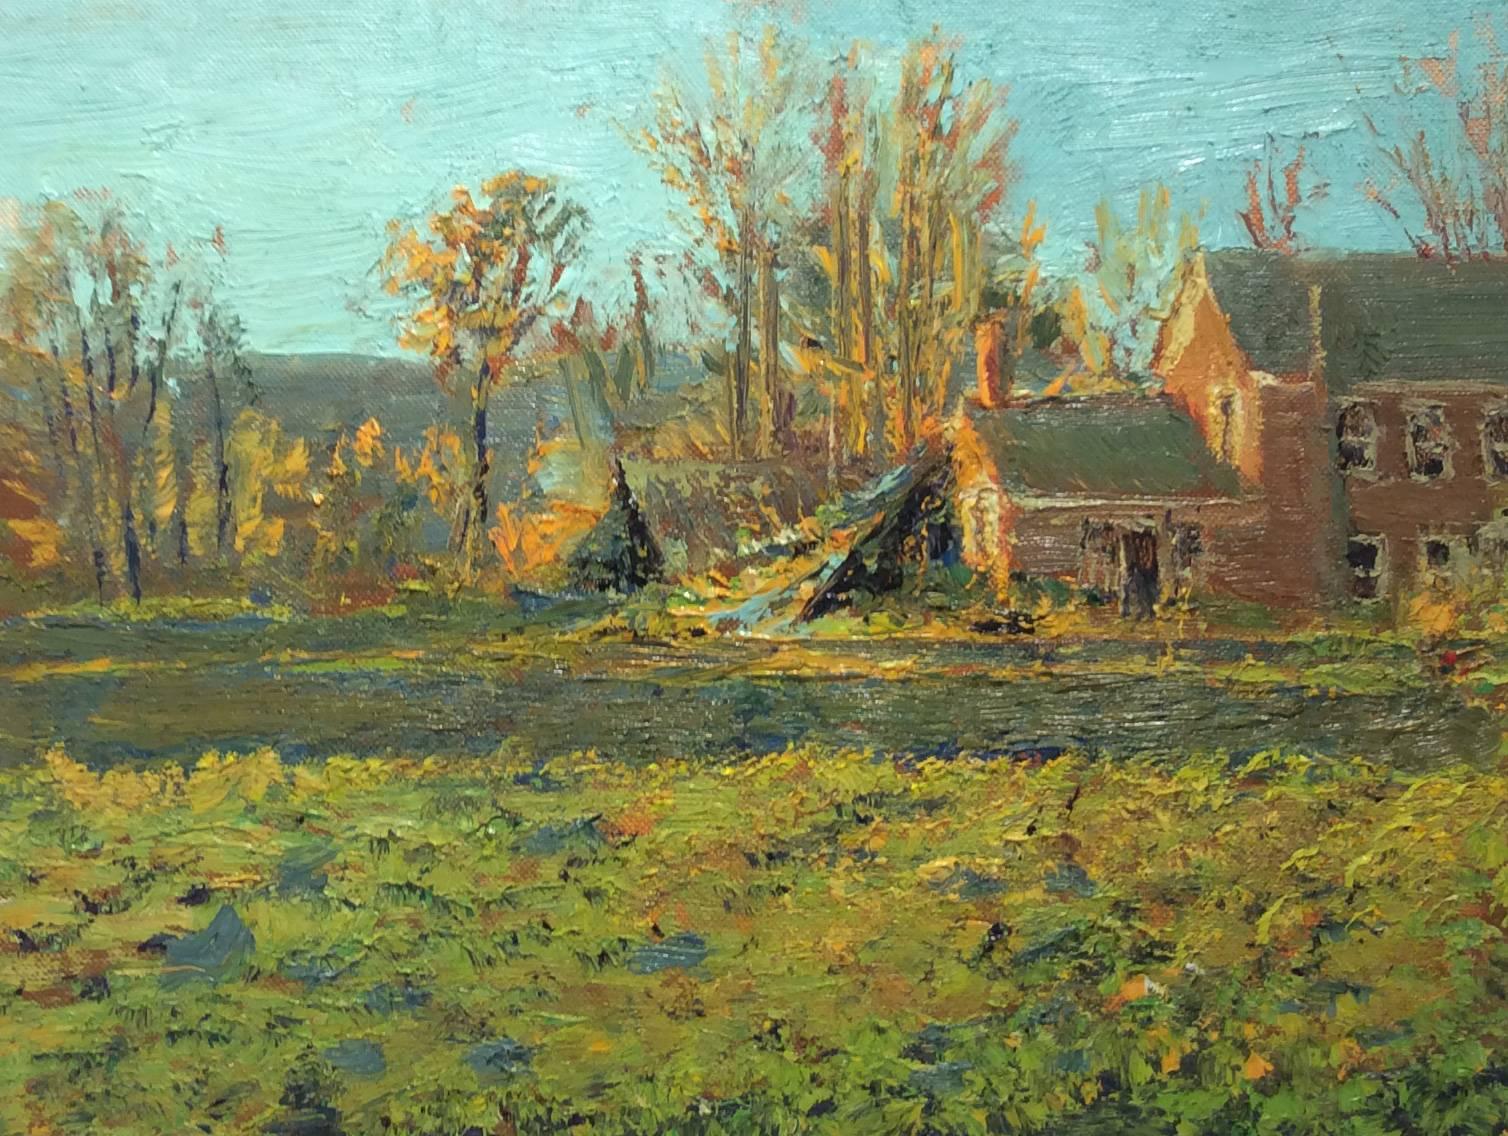 Harry Orlyk Landscape Painting - #5511 The Old Walker House: Modern Impressionist Landscape Oil Painting on Linen